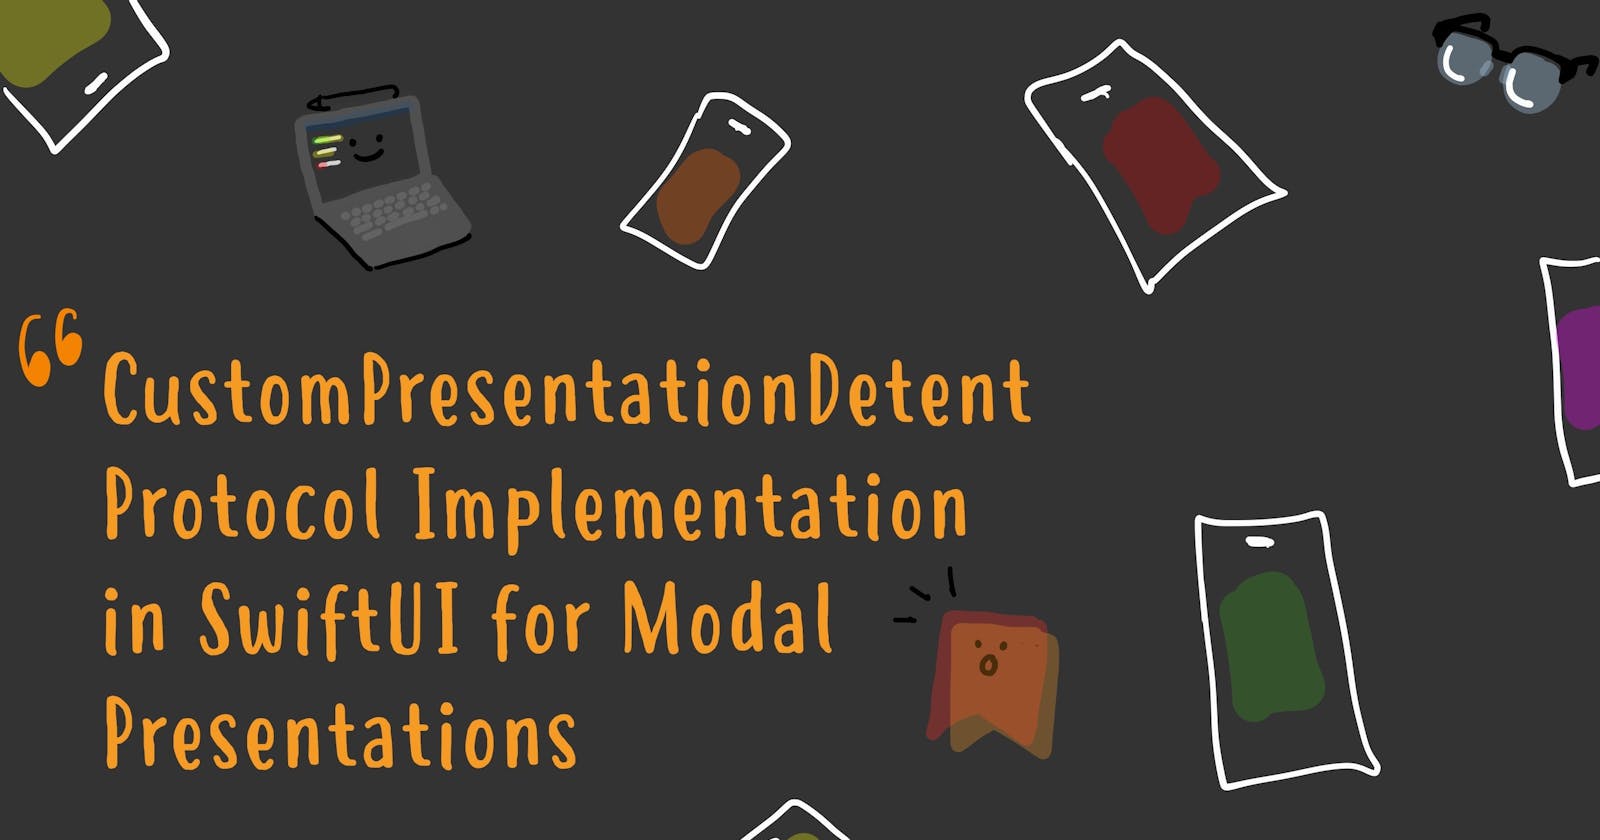 CustomPresentationDetent Protocol Implementation in SwiftUI for Modal Presentations